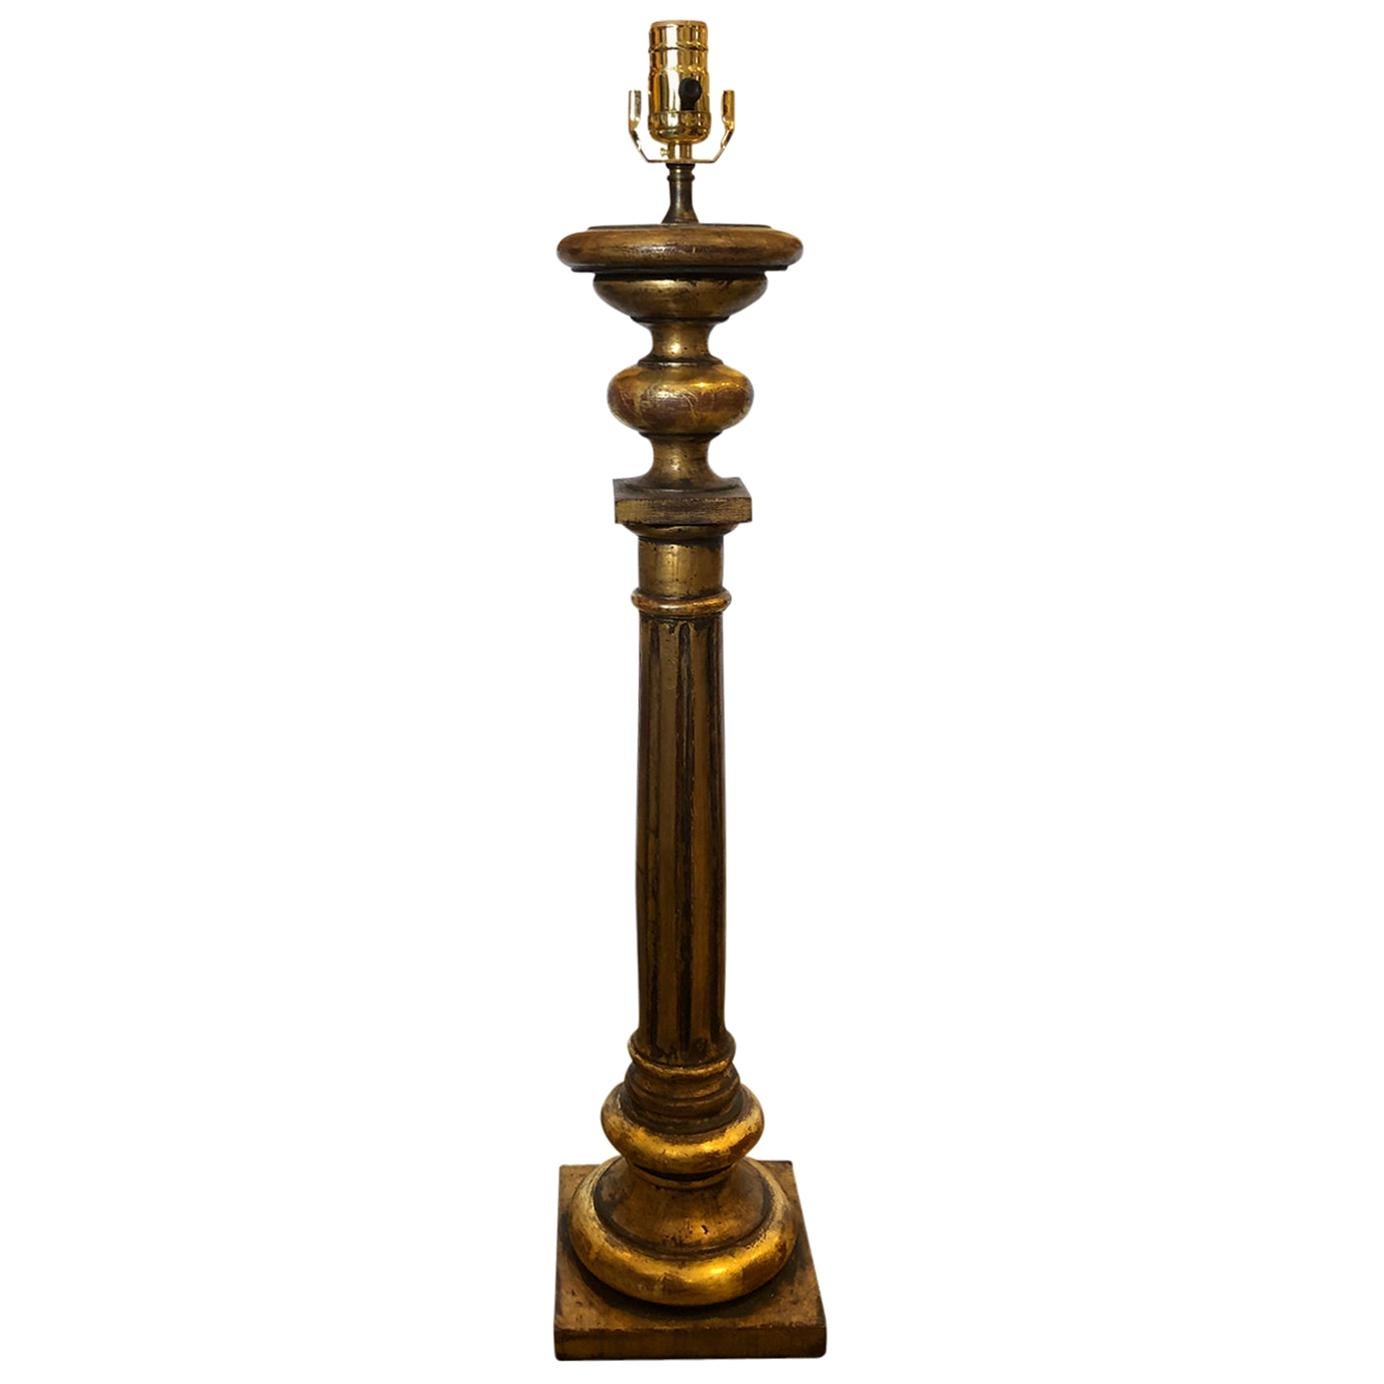 Early 20th Century Italian Neoclassical Giltwood Column Lamp For Sale